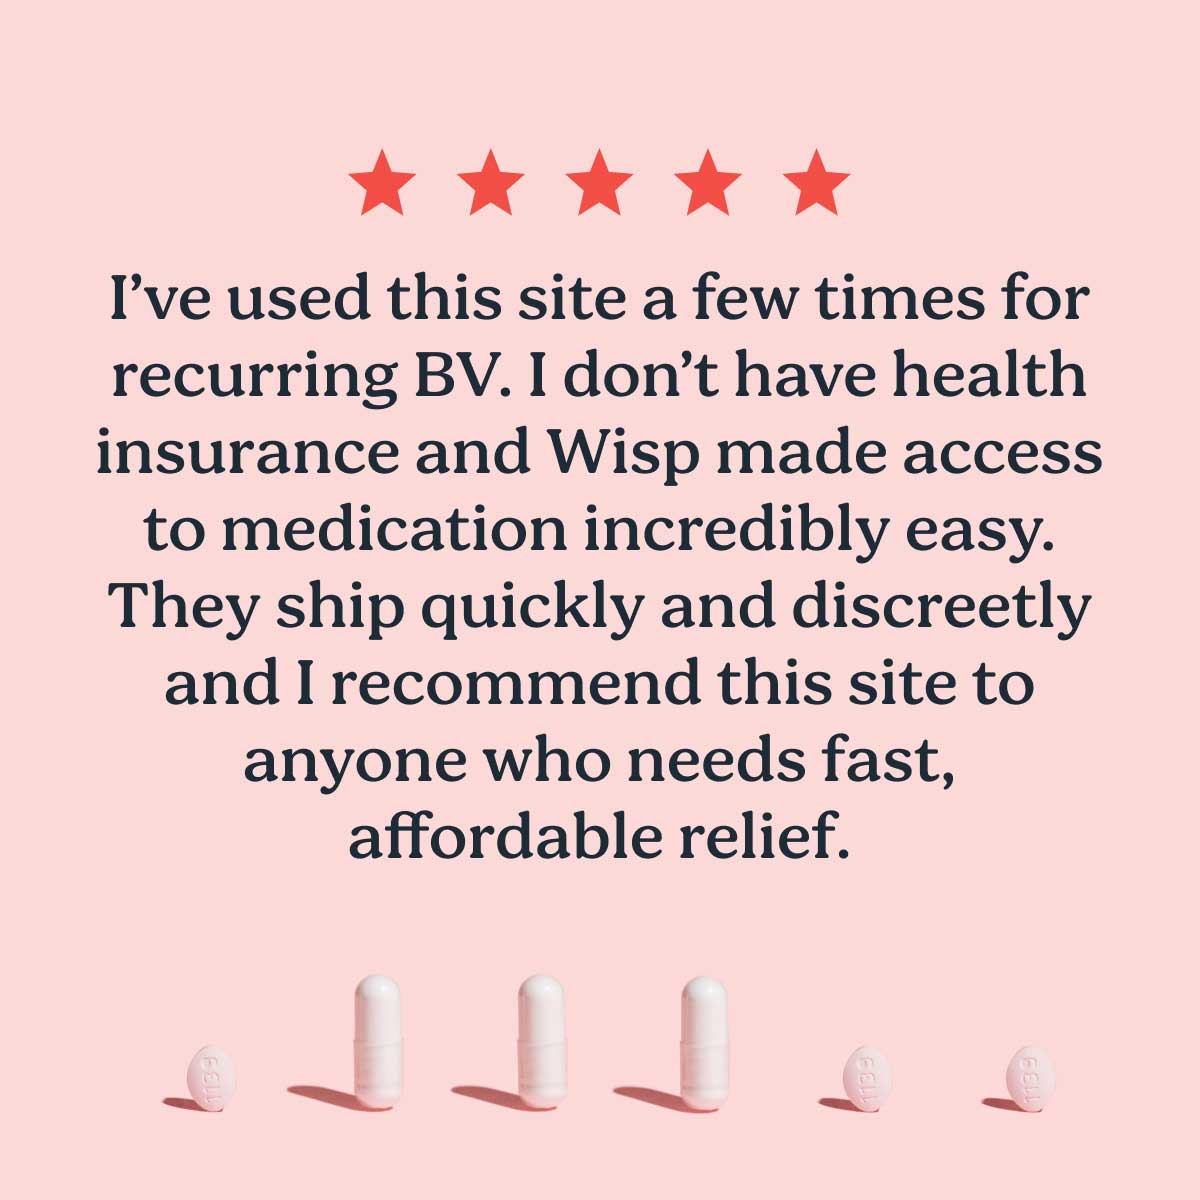 5 star customer review for BV treatment with pill cutouts on a pinkbackground